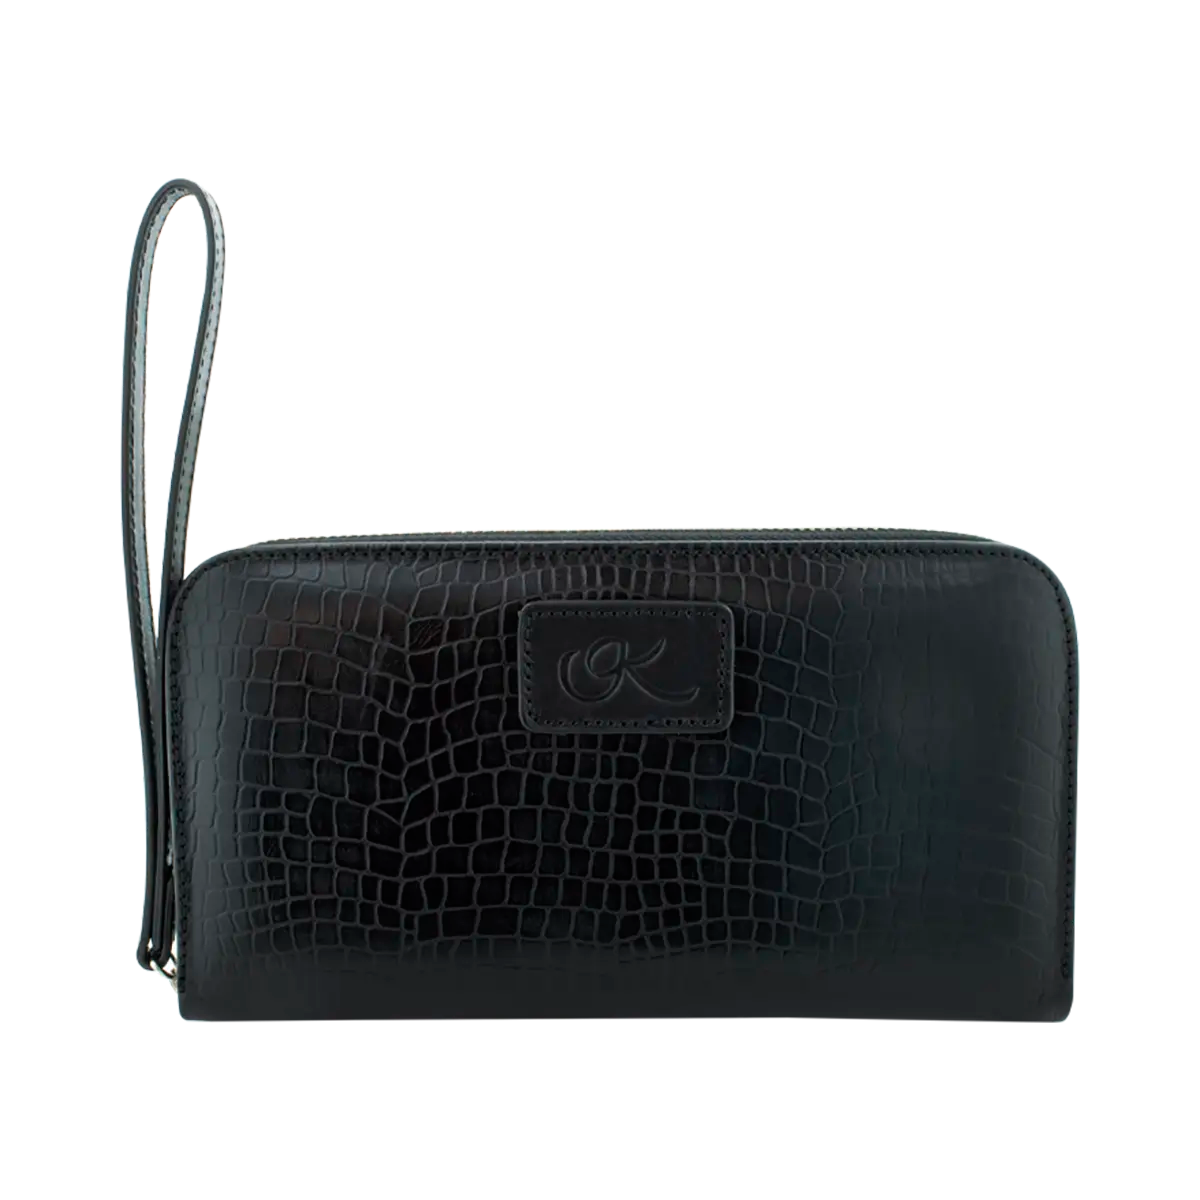 largeblack leather wallet with hand strap. Fashion Accessories for women shop in San Diego, CA.